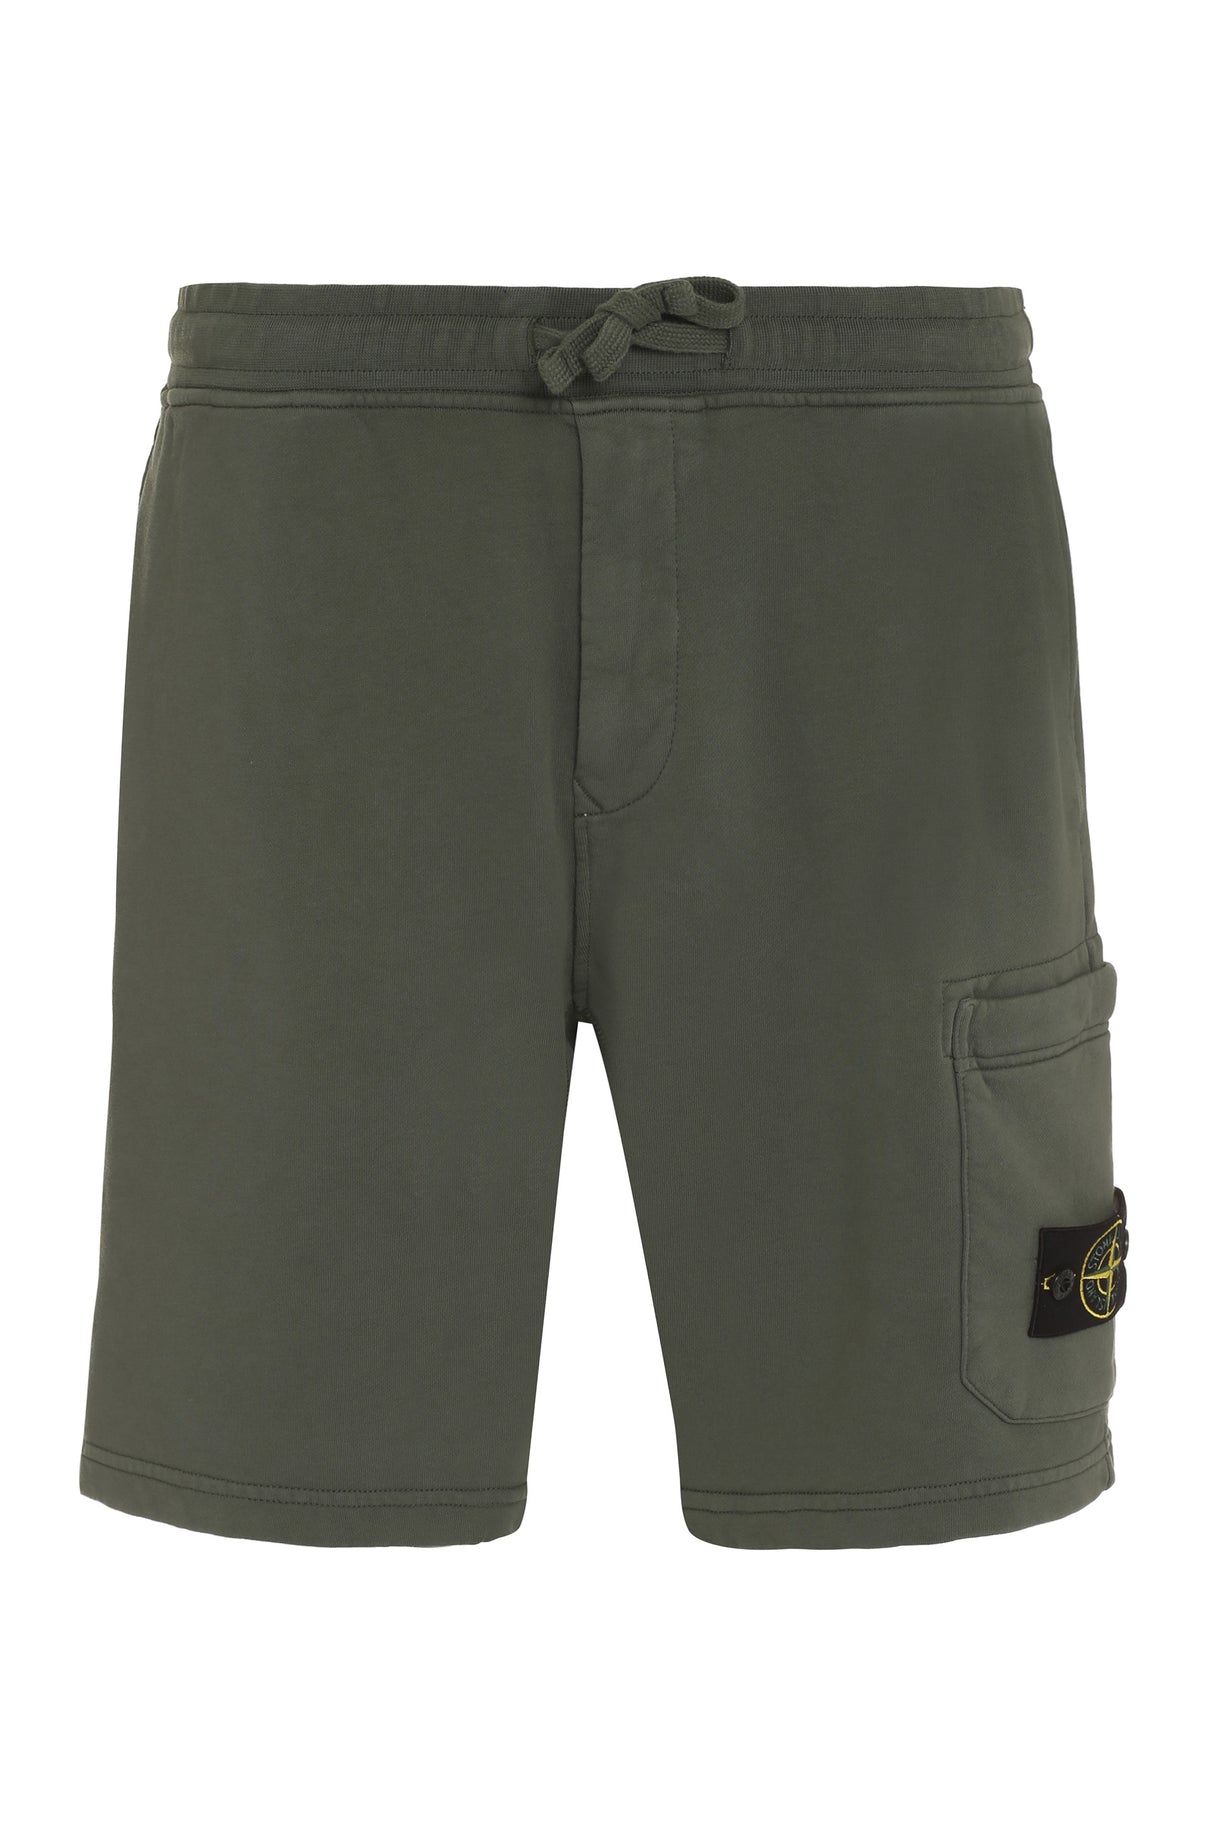 Musk Cotton Shorts for Men - SS24